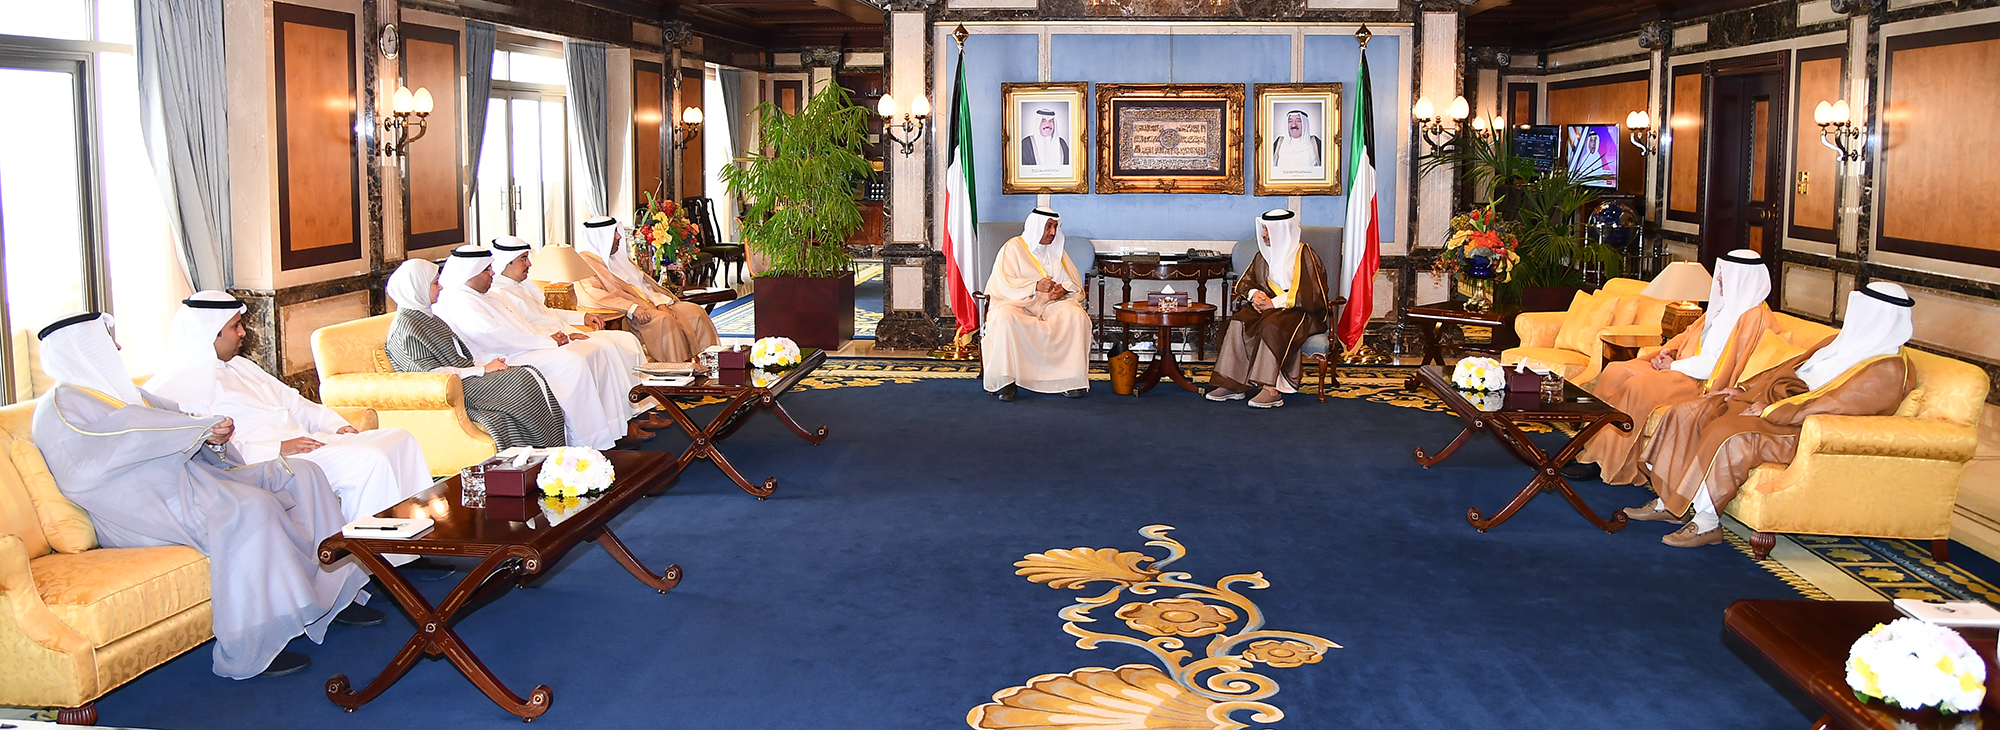 His Highness the Prime Minister Sheikh Jaber Al-Mubarak Al-Hamad Al-Sabah received inister of Public Works Hussam Al-Roumi and newly-appointed members of the Municipality Board